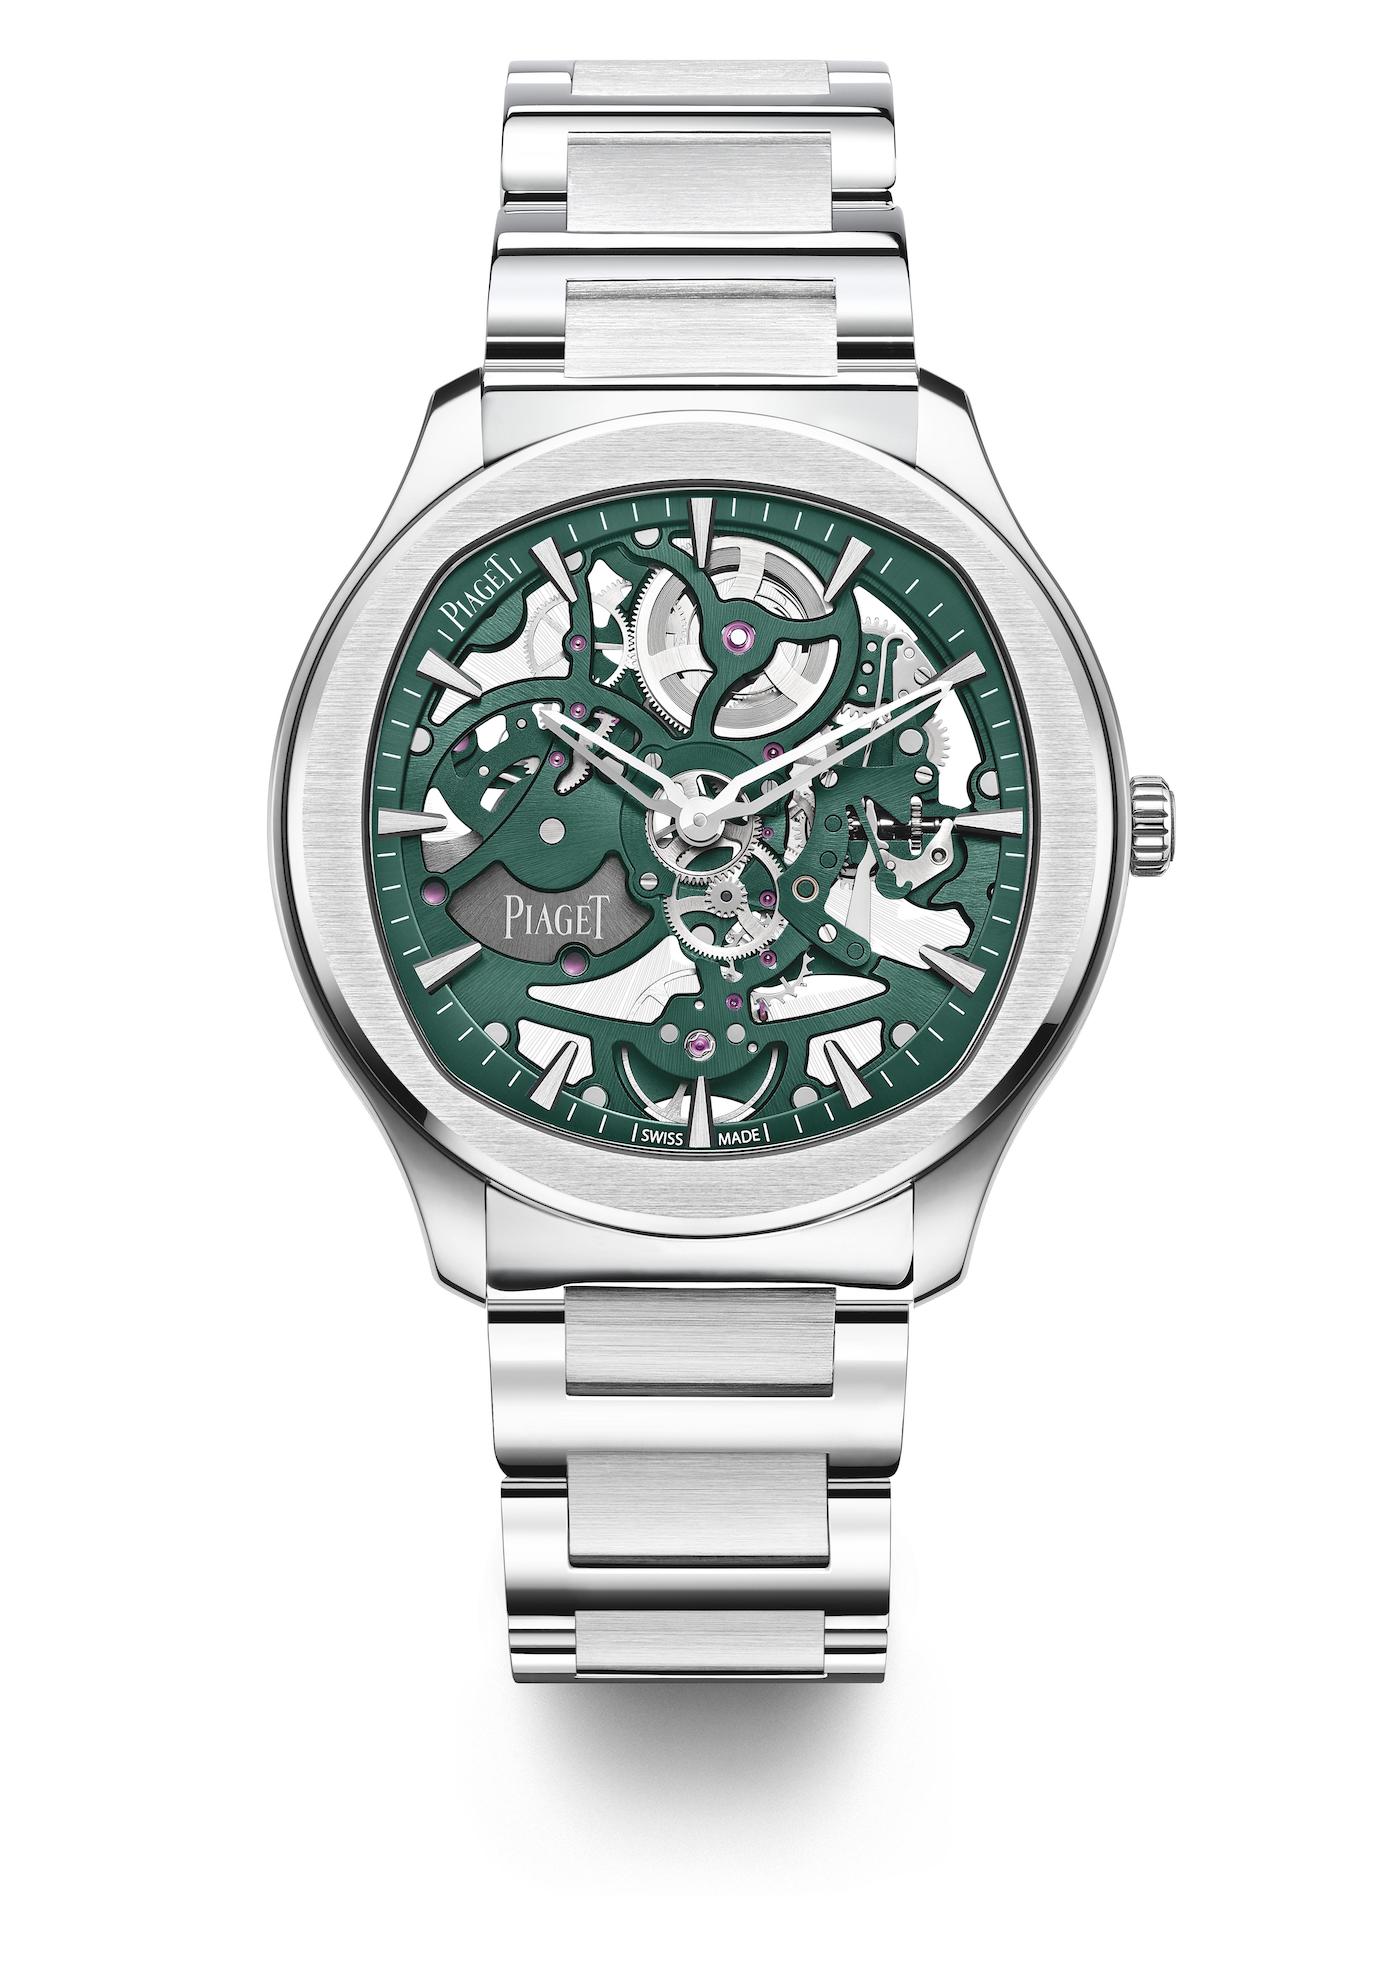 Piaget Polo Skeleton watch in stainless steel with green movement parts and chapter ring